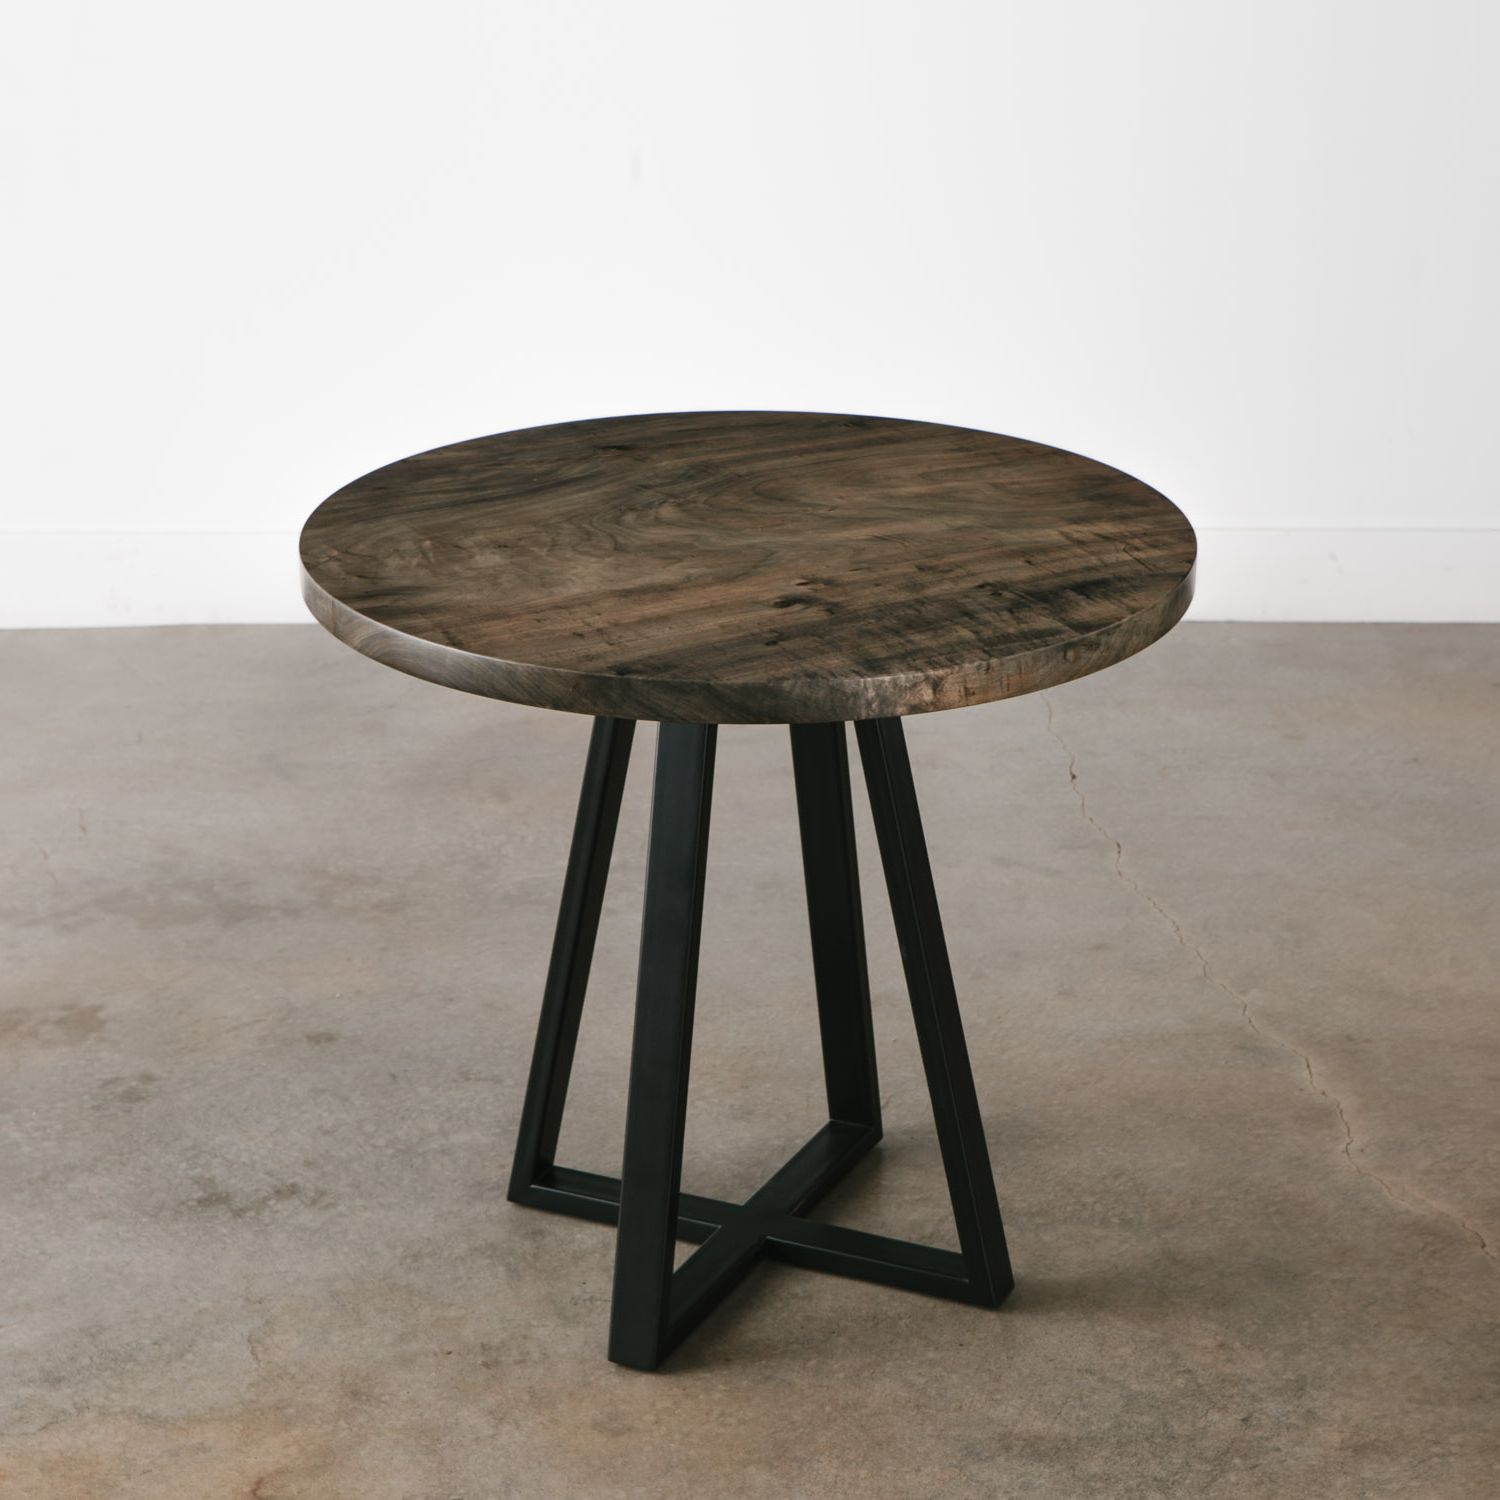 Most Recent Oxidized Coffee Tables With Regard To Oxidized Maple Cafe Table No (View 12 of 20)